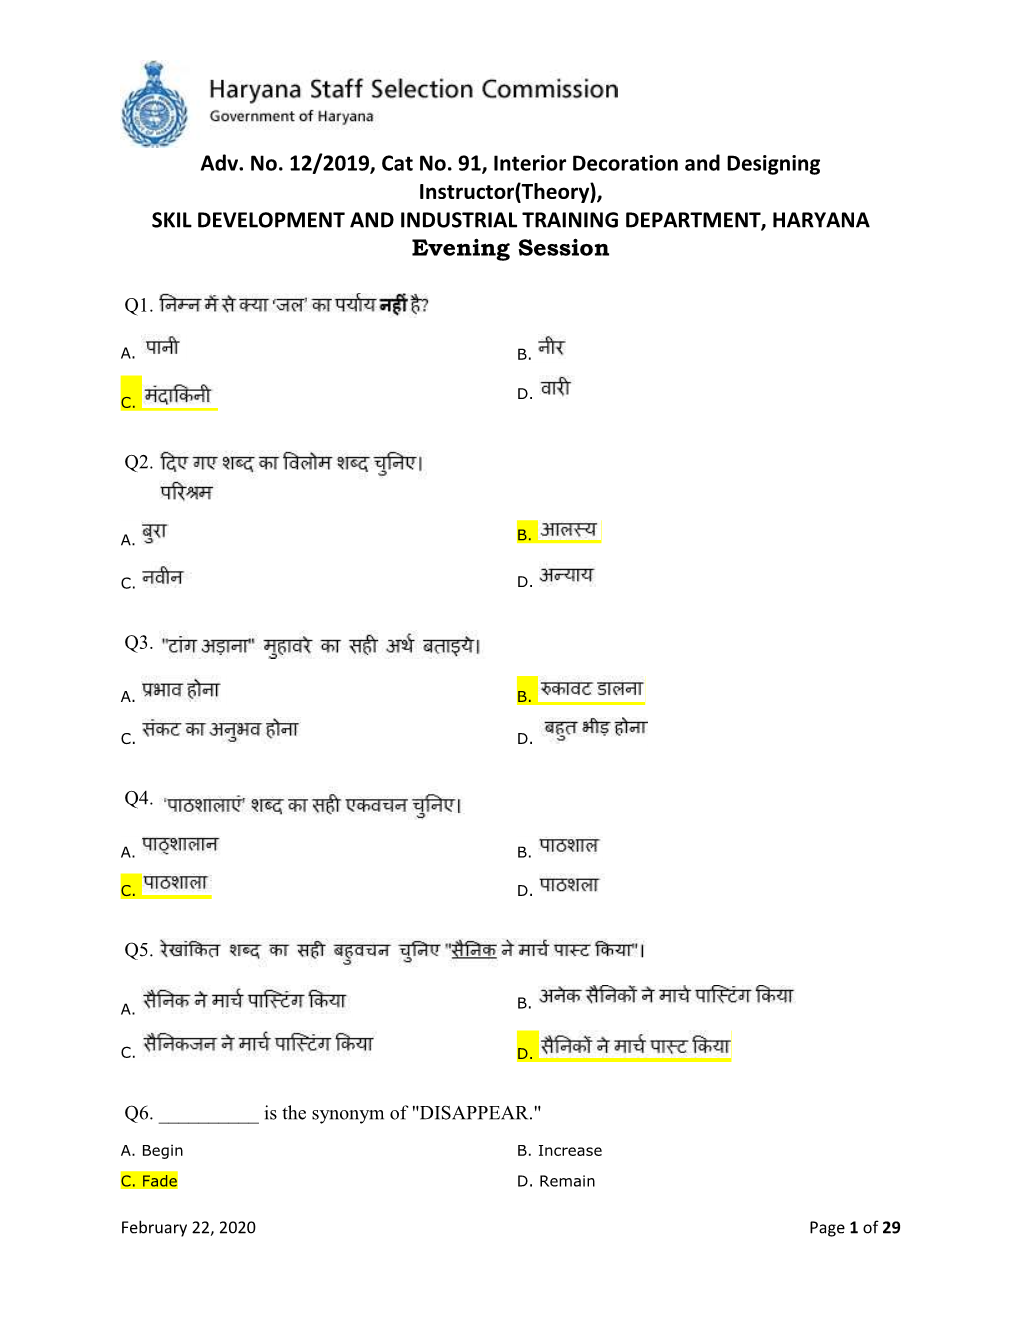 Adv. No. 12/2019, Cat No. 91, Interior Decoration and Designing Instructor(Theory), SKIL DEVELOPMENT and INDUSTRIAL TRAINING DEPARTMENT, HARYANA Evening Session